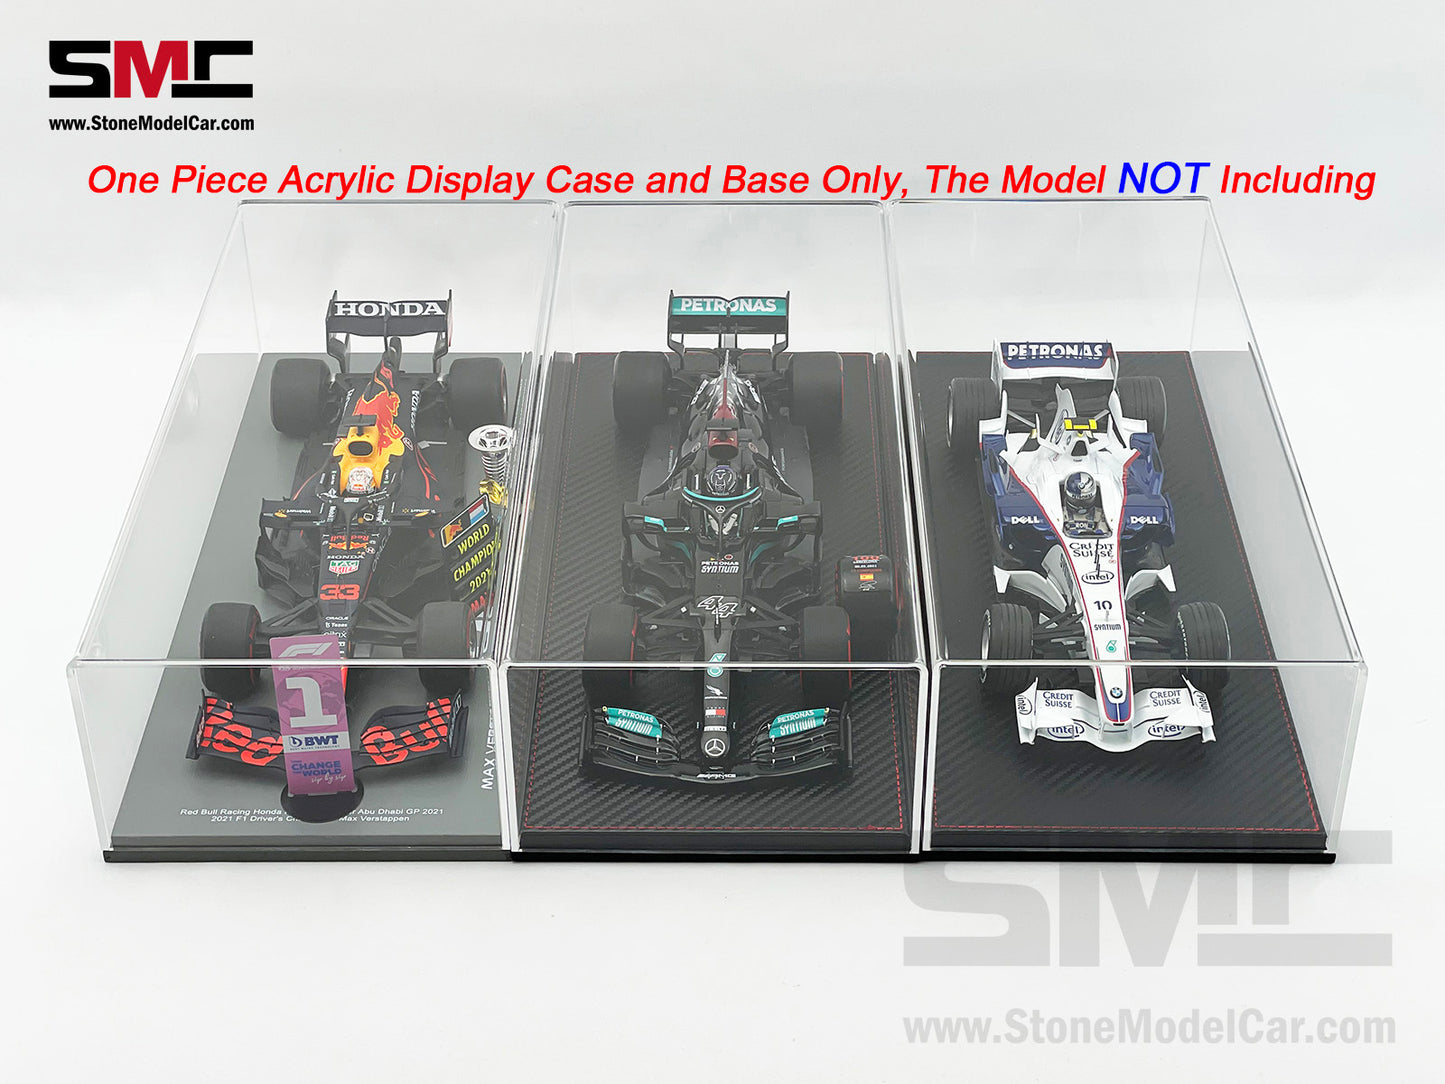 Premium Acrylic Display Cover & Show Case with Carbon Fiber Style Base for 1:18 Car Models